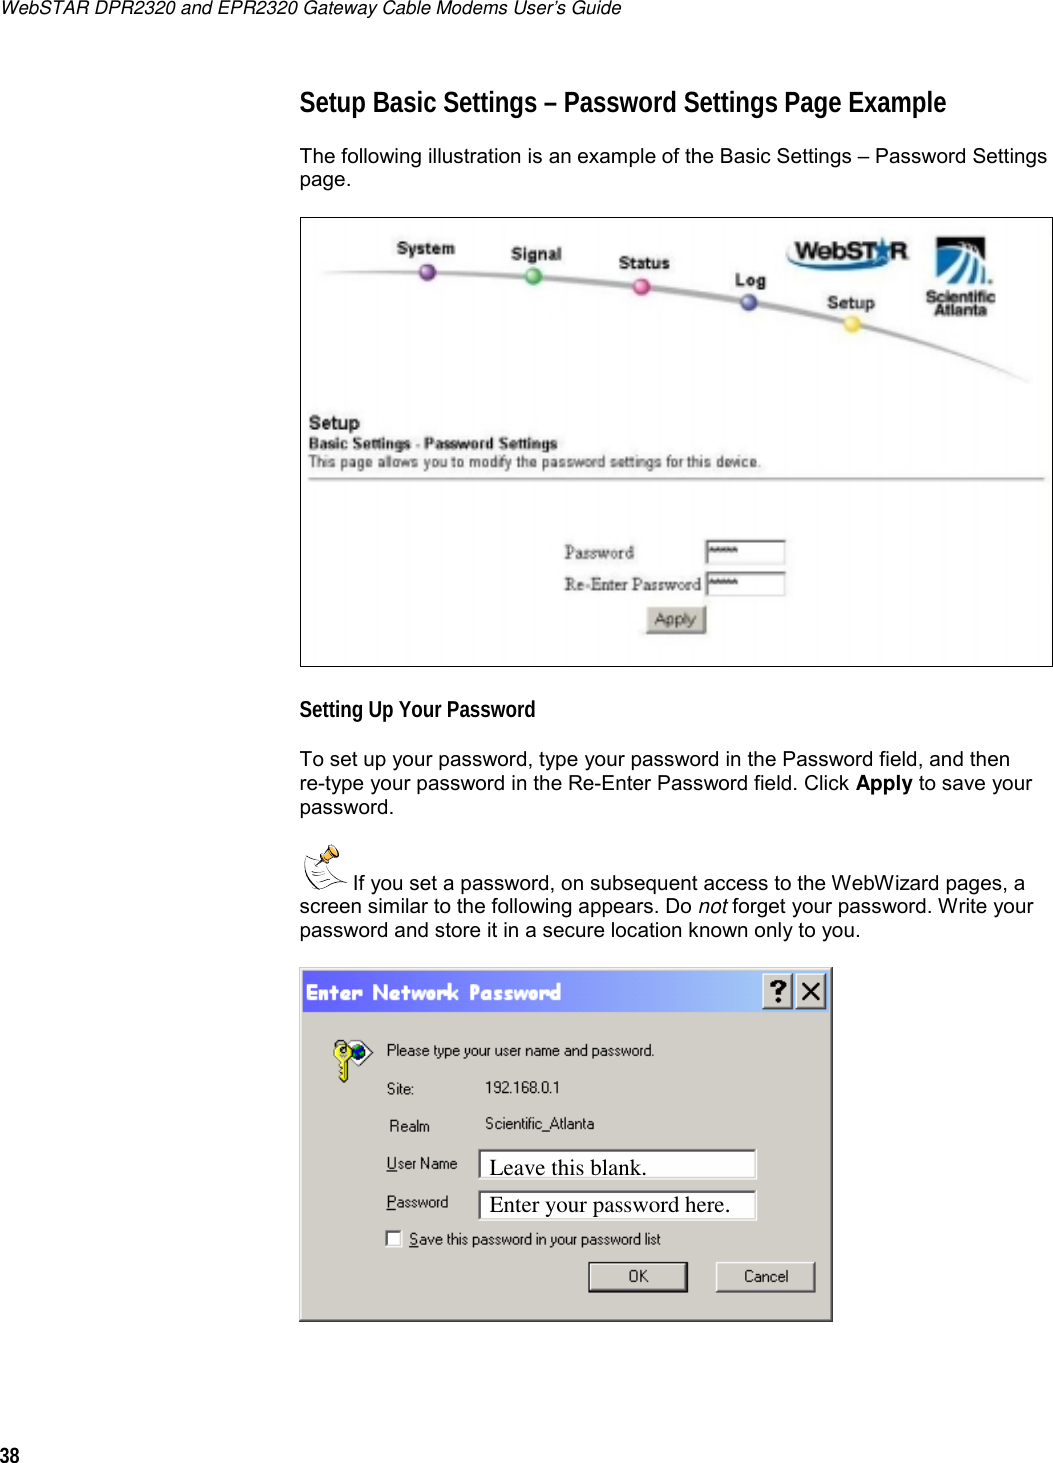 WebSTAR DPR2320 and EPR2320 Gateway Cable Modems User’s Guide 38  Setup Basic Settings – Password Settings Page Example The following illustration is an example of the Basic Settings – Password Settings page.  Setting Up Your Password To set up your password, type your password in the Password field, and then  re-type your password in the Re-Enter Password field. Click Apply to save your password.  If you set a password, on subsequent access to the WebWizard pages, a screen similar to the following appears. Do not forget your password. Write your password and store it in a secure location known only to you.    Leave this blank.     Enter your password here. 